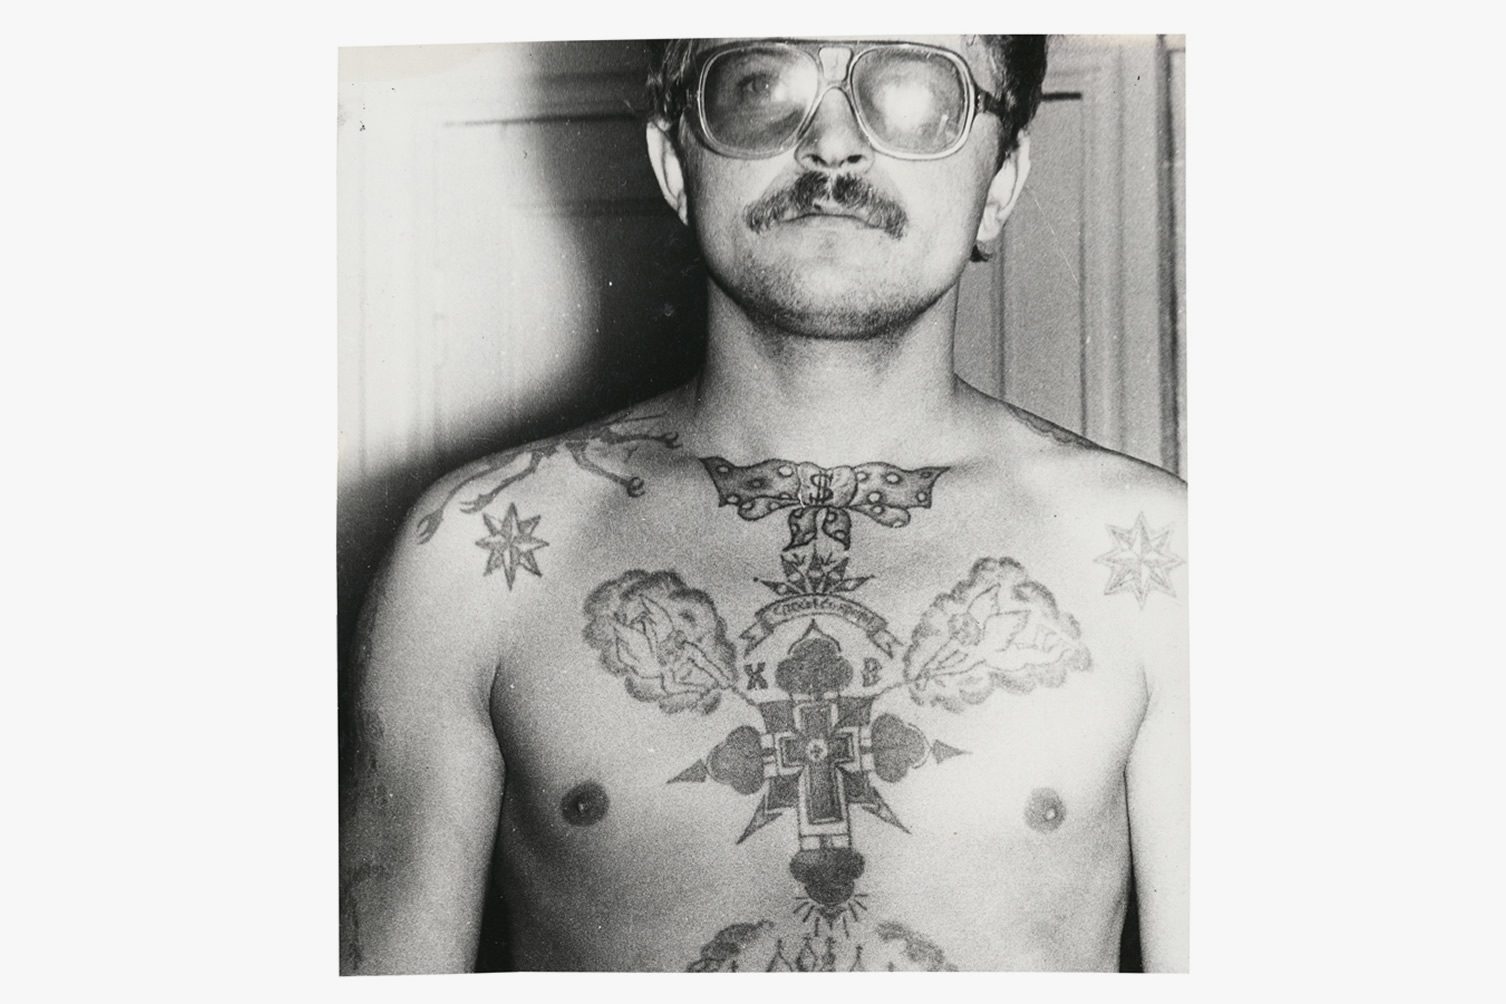 Russian Prisoners Tattoos and their Gambling Gangs  Tattoo Ideas  Artists and Models